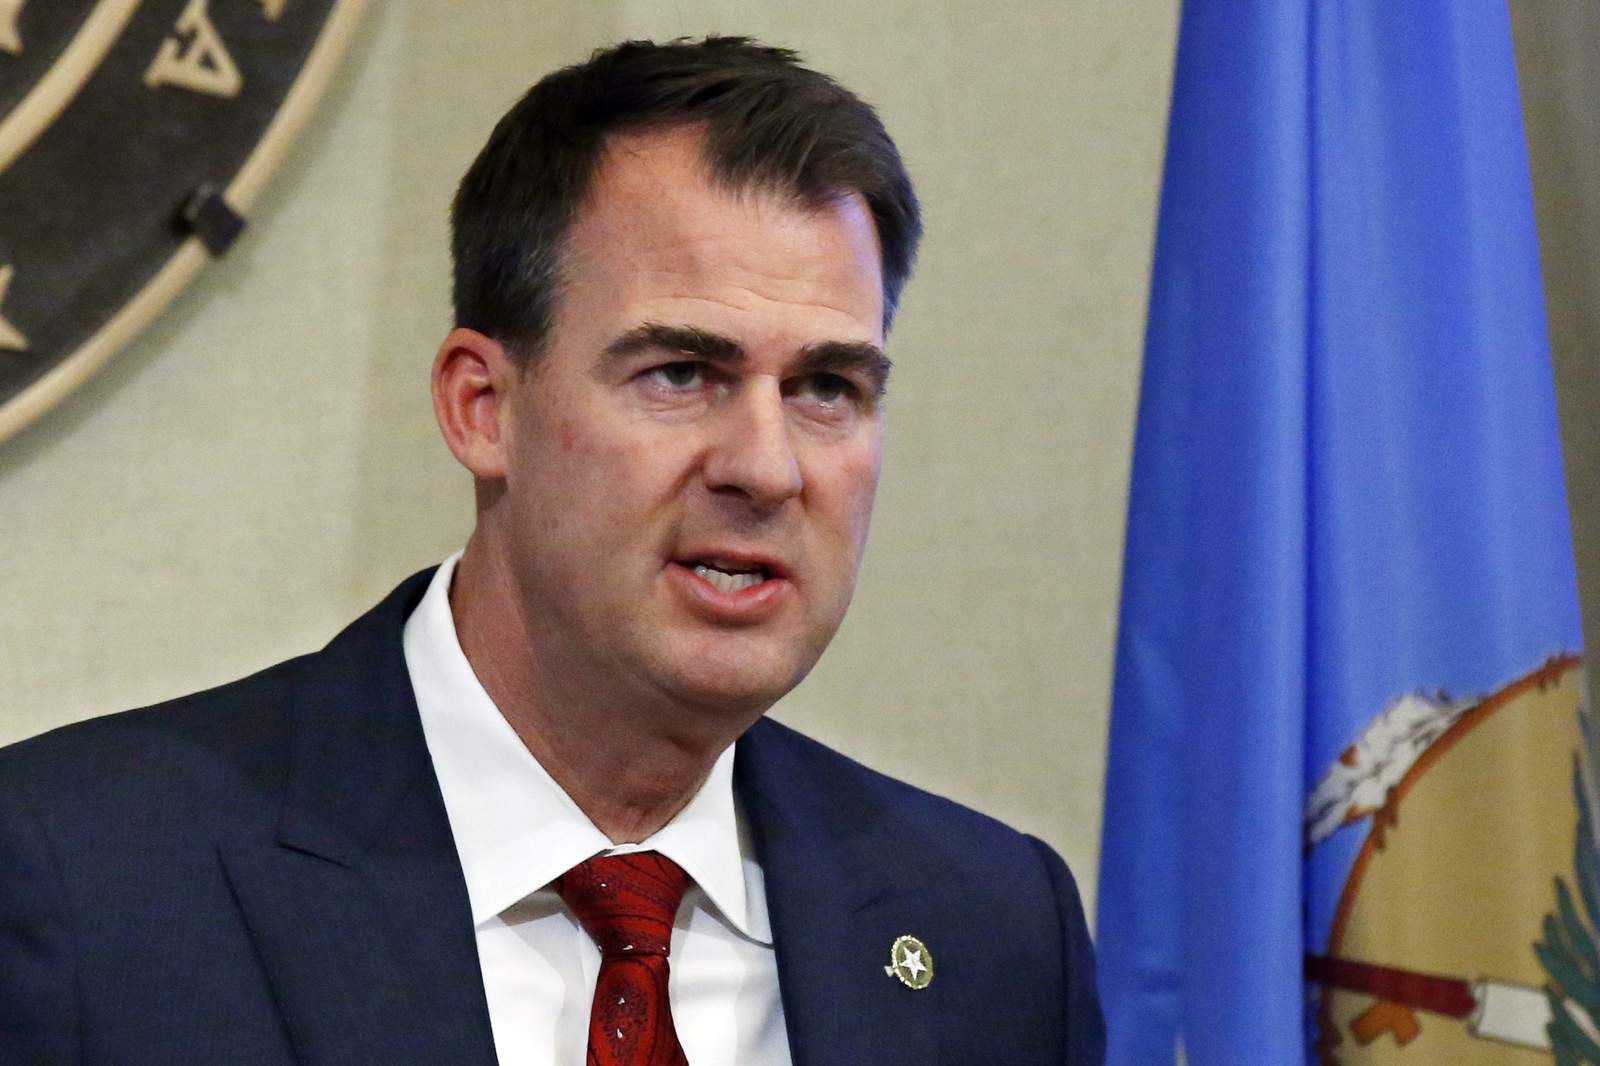 Oklahomas governor says he has tested positive for COVID-19